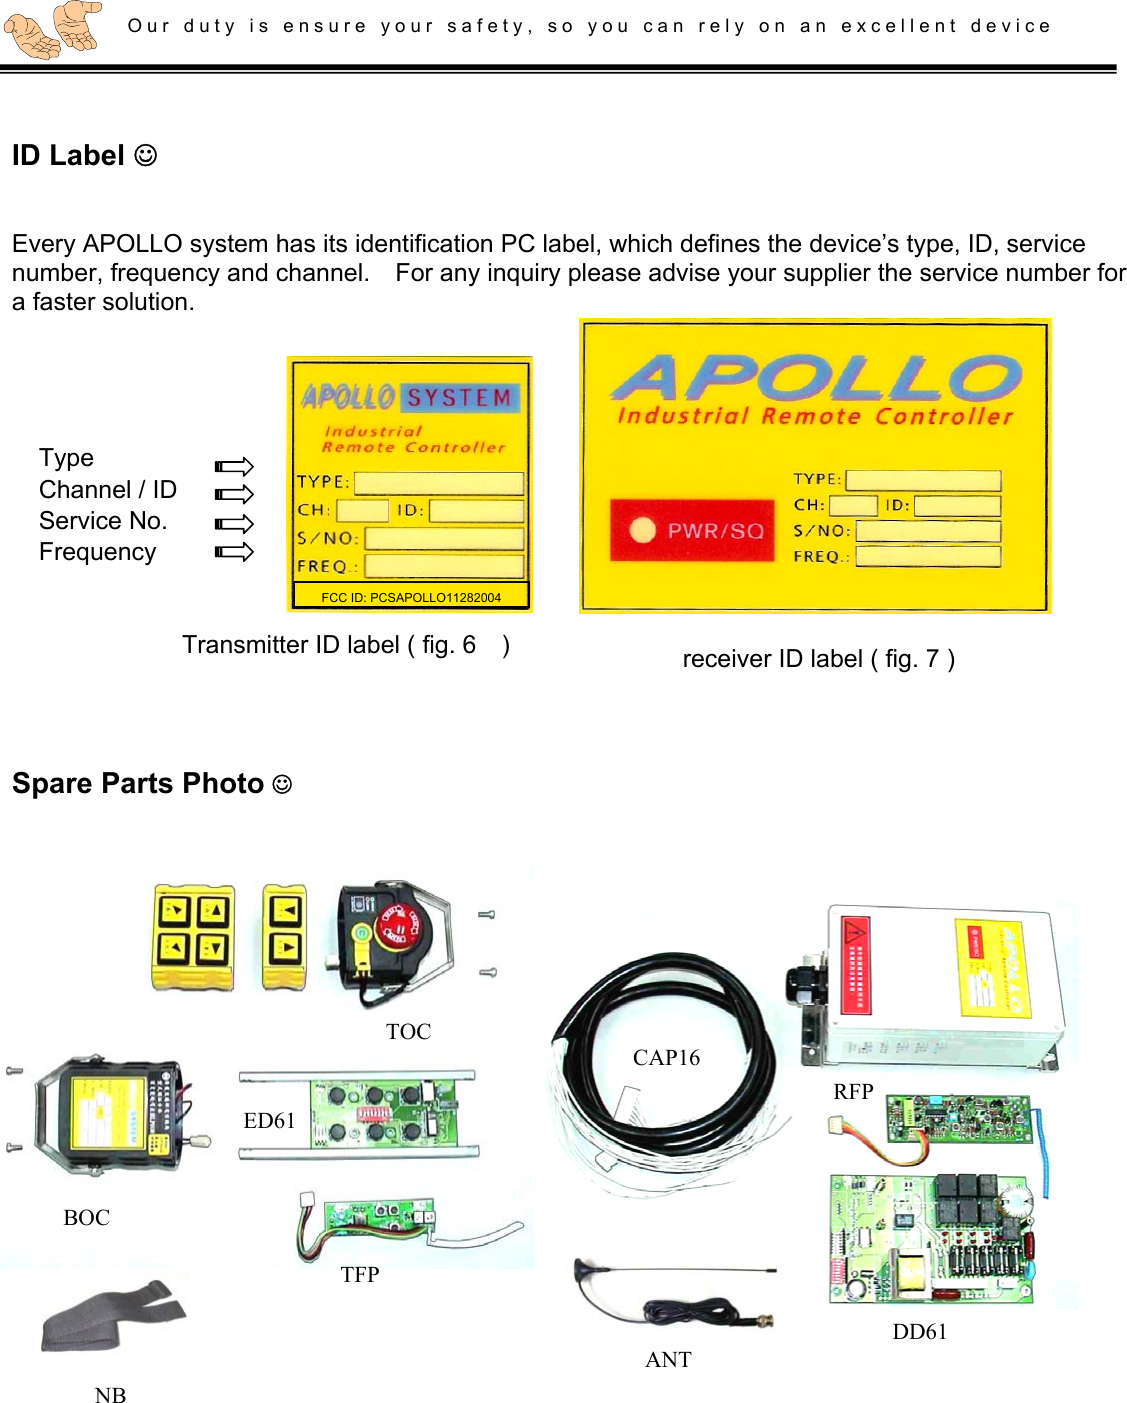   Our duty is ensure your safety, so you can rely on an excellent device        ID Label ☺                                                  Every APOLLO system has its identification PC label, which defines the device’s type, ID, service number, frequency and channel.    For any inquiry please advise your supplier the service number for a faster solution.                   Spare Parts Photo ☺  (  C1-6PB  )                     Type Channel / ID Service No. Frequency  Transmitter ID label ( fig. 6    ) receiver ID label ( fig. 7 ) TOC BOC ED61 TFP BOX.1 RFP CAP16NB 2TH 4TH ANTDD61 FCC ID: PCSAPOLLO11282004